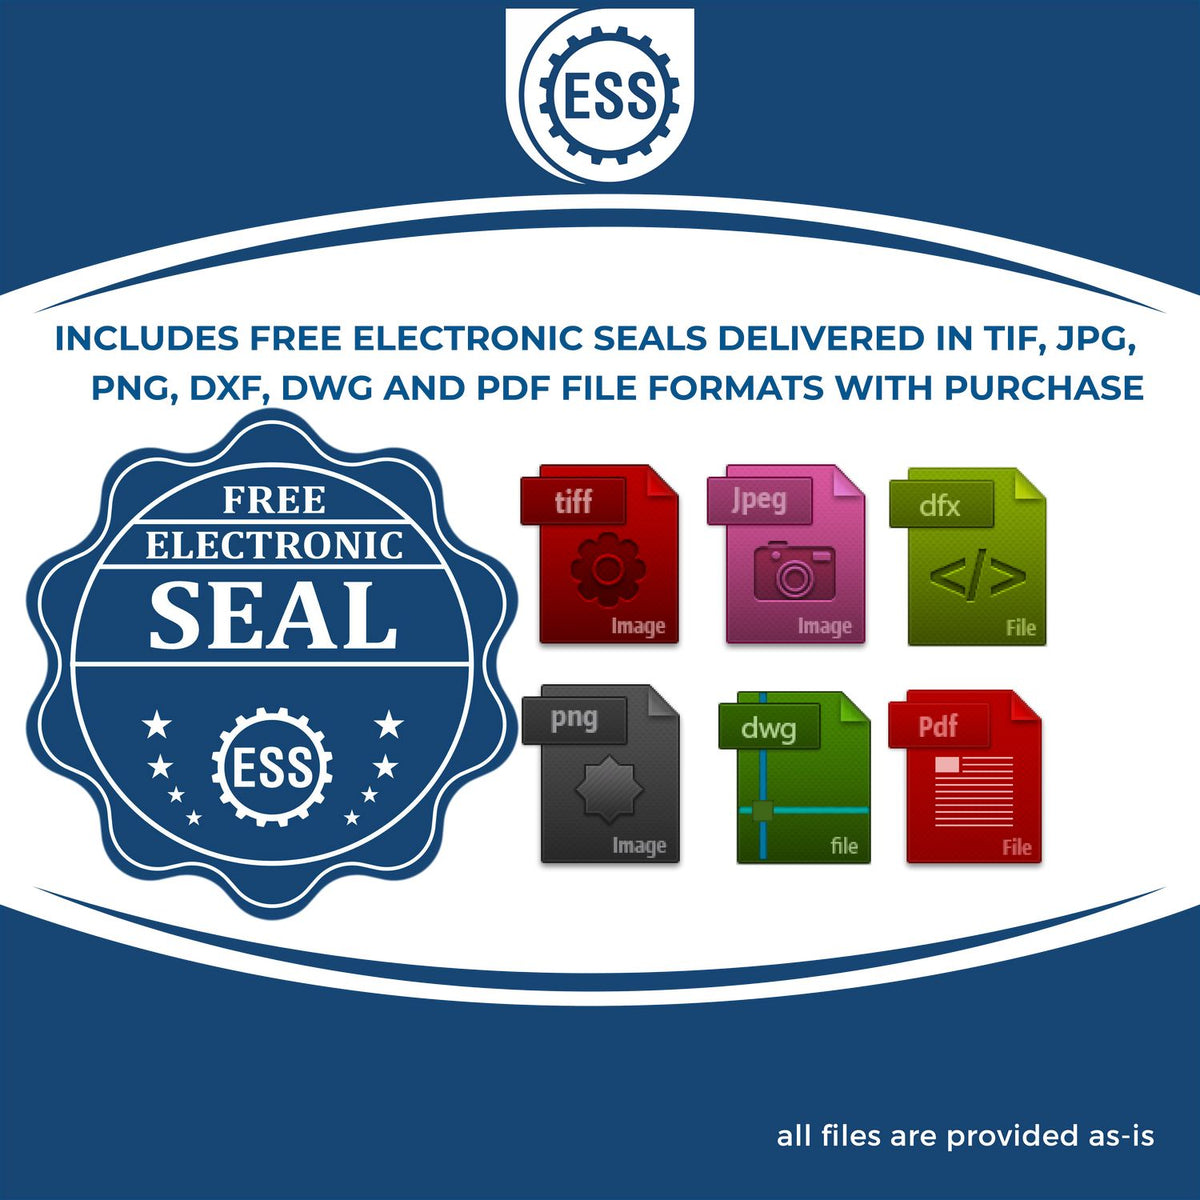 An infographic for the free electronic seal for the State of Louisiana Extended Long Reach Geologist Seal illustrating the different file type icons such as DXF, DWG, TIF, JPG and PNG.